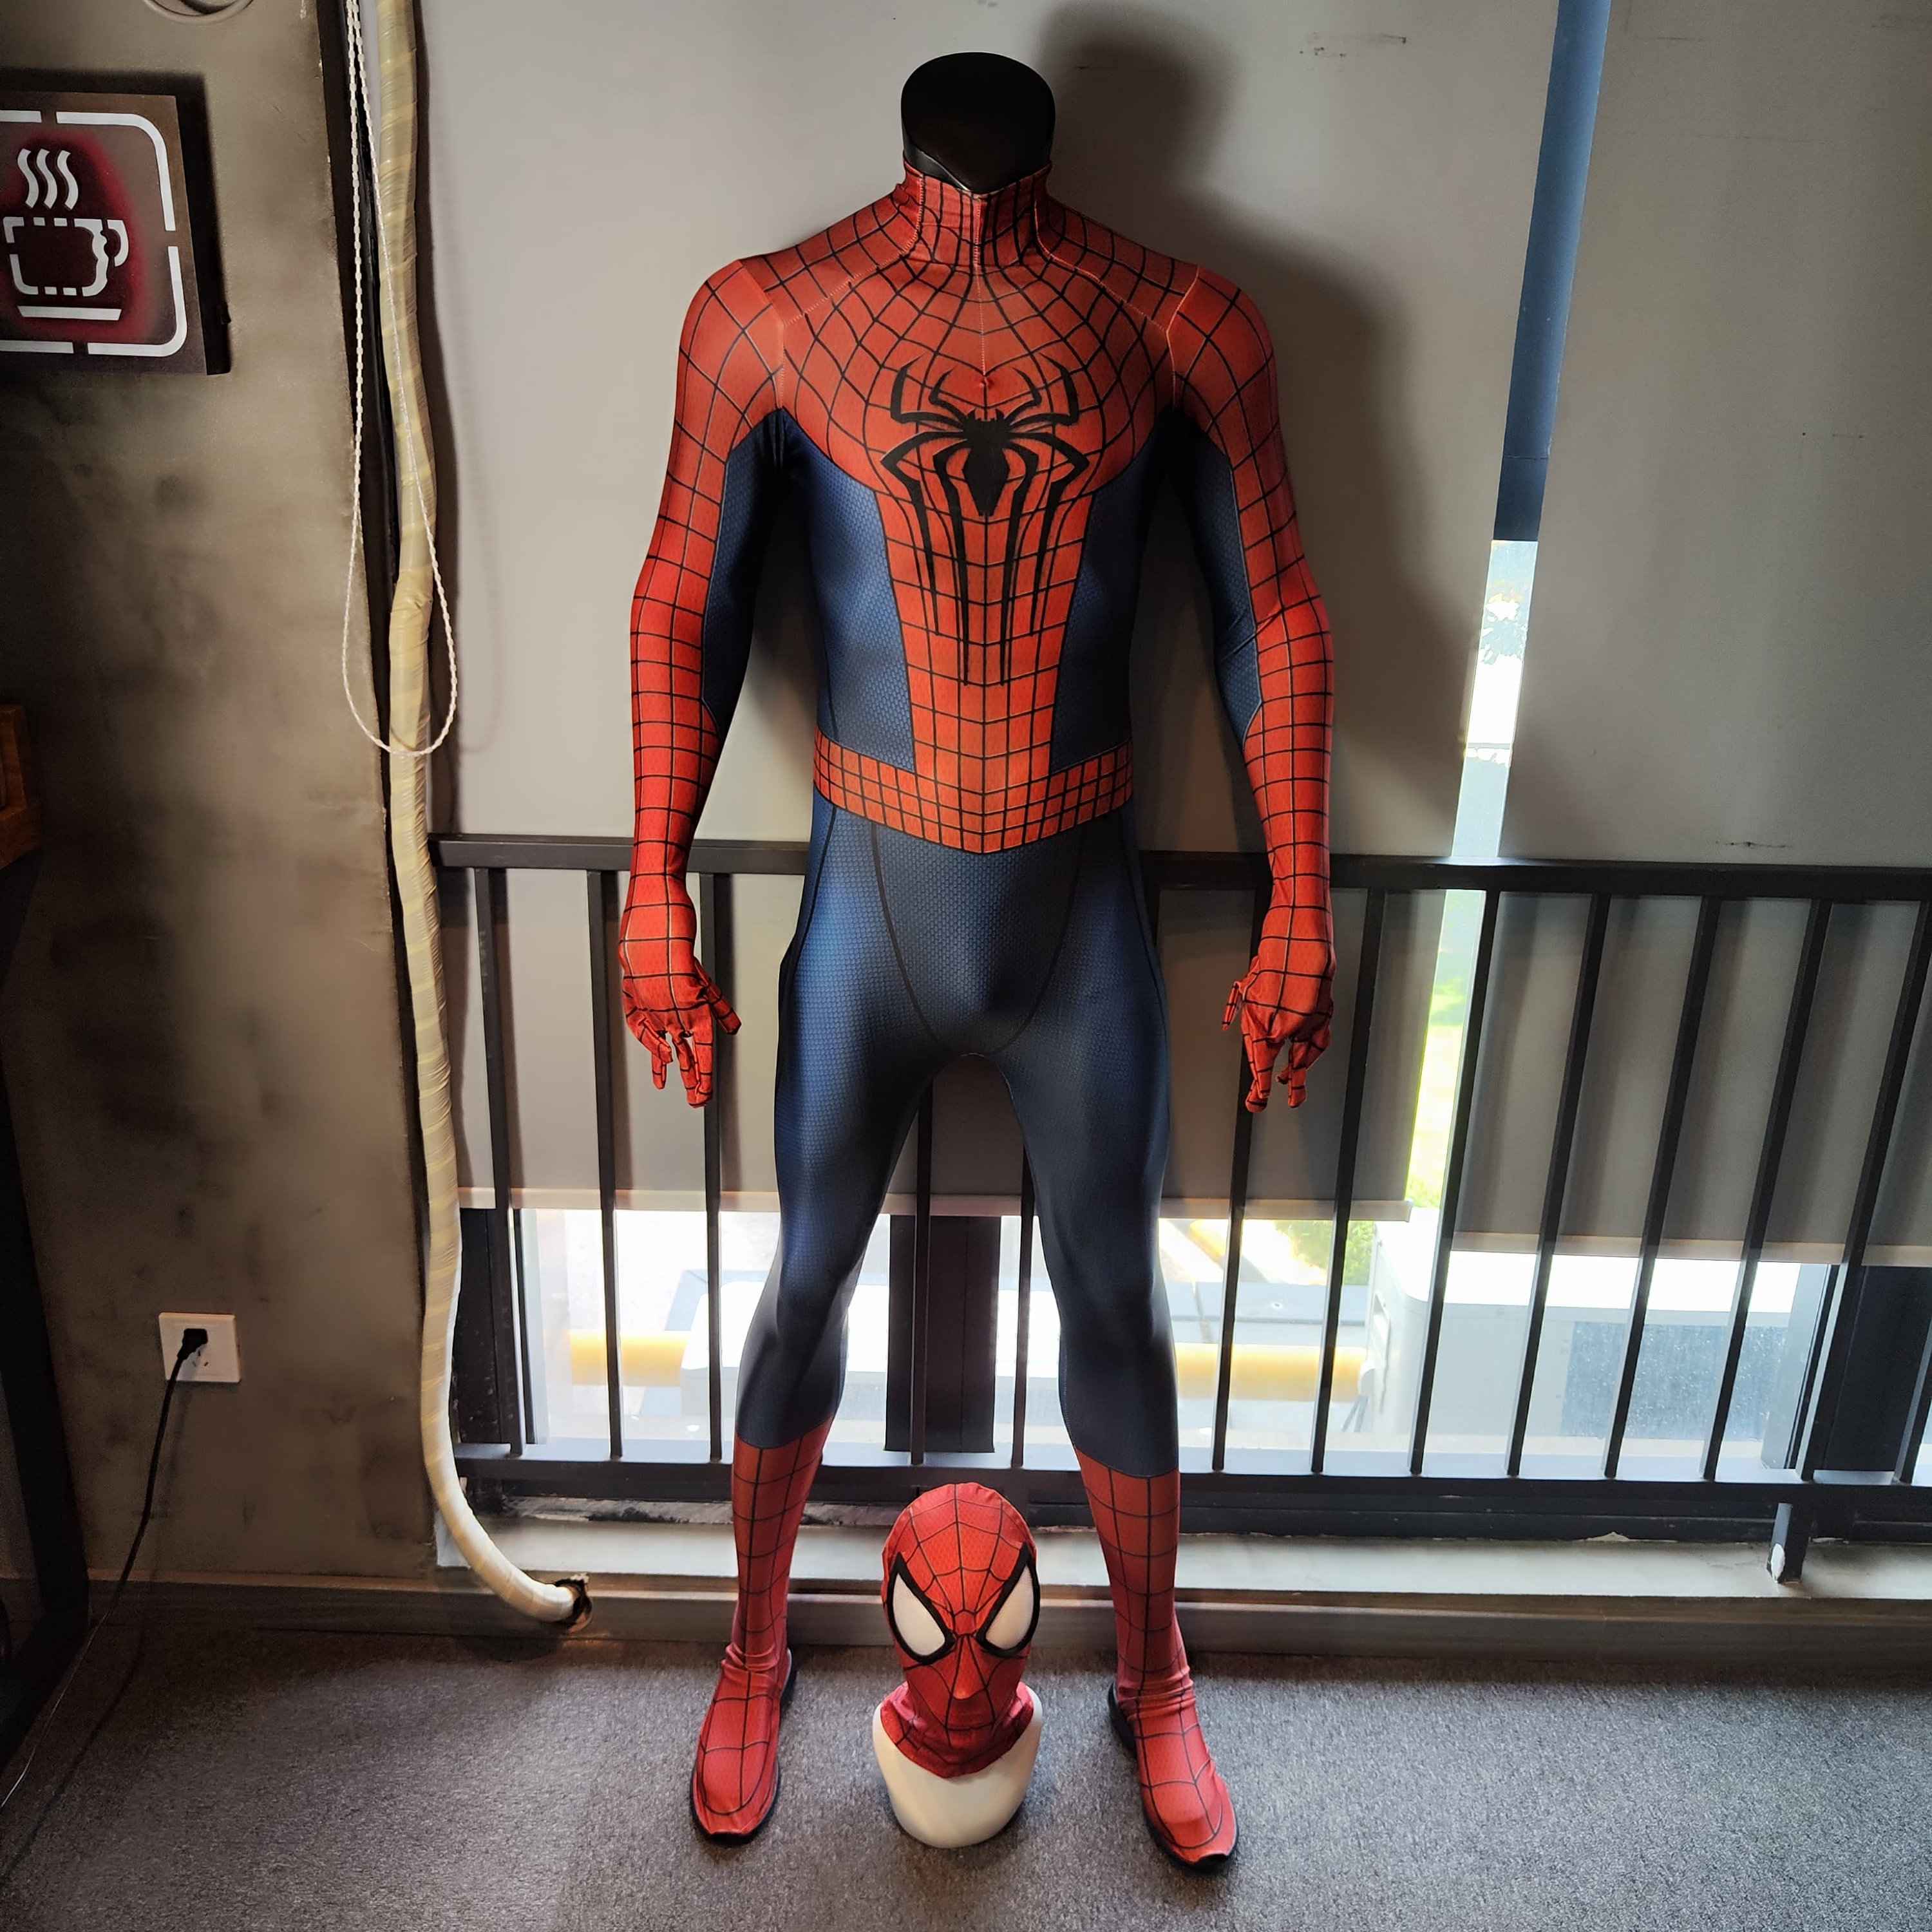 Spider Costume in The Amazing Spider 2 with 3D Emblems